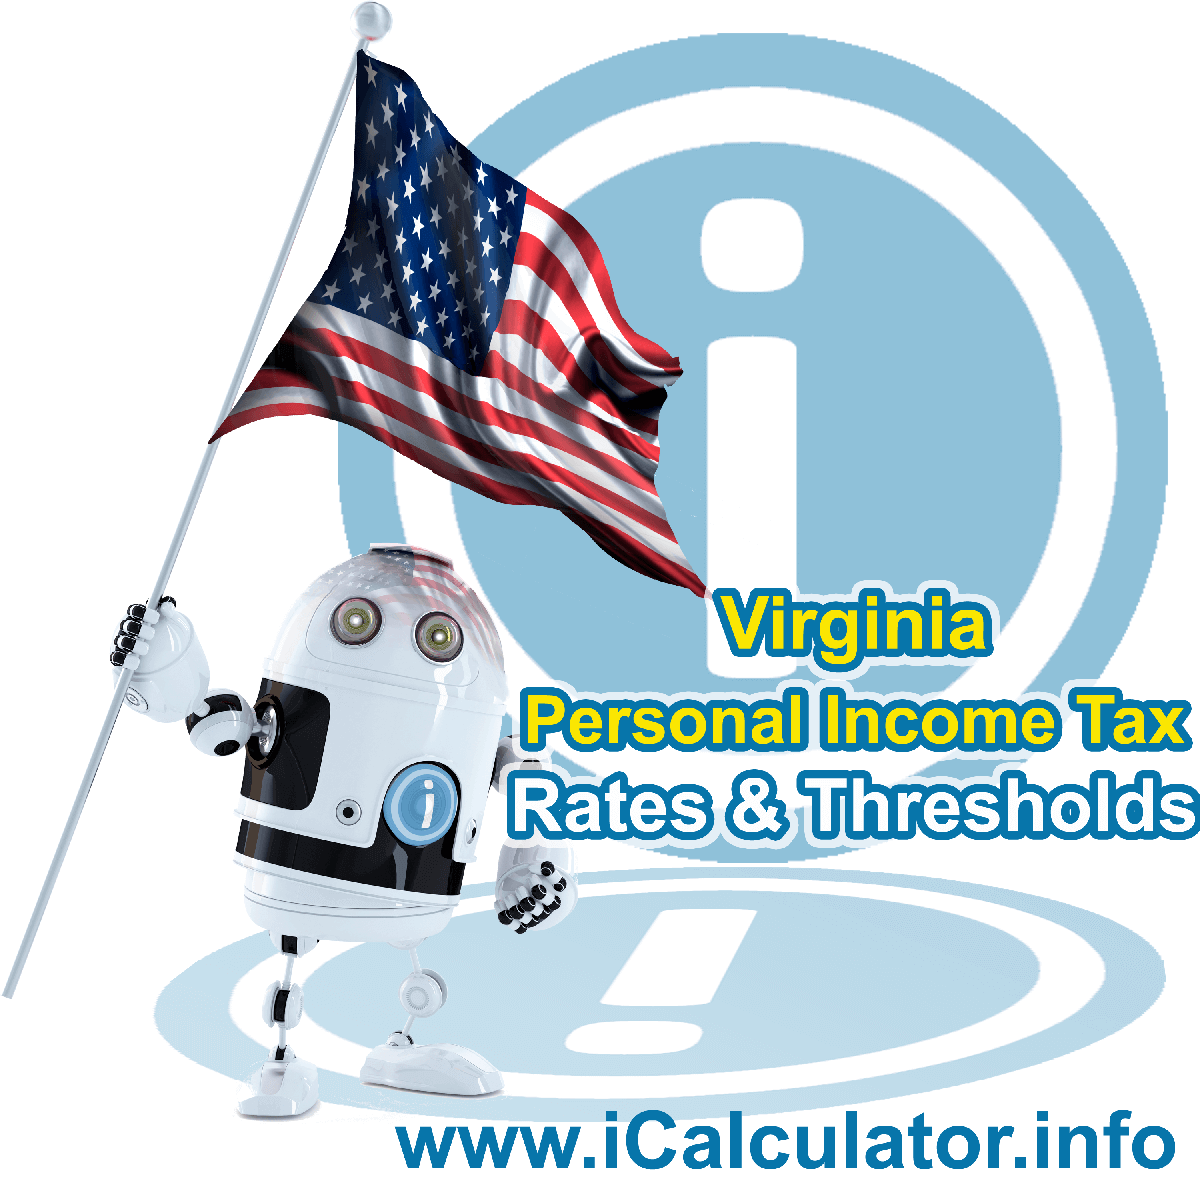 Virginia State Tax Tables 2022. This image displays details of the Virginia State Tax Tables for the 2022 tax return year which is provided in support of the 2022 US Tax Calculator